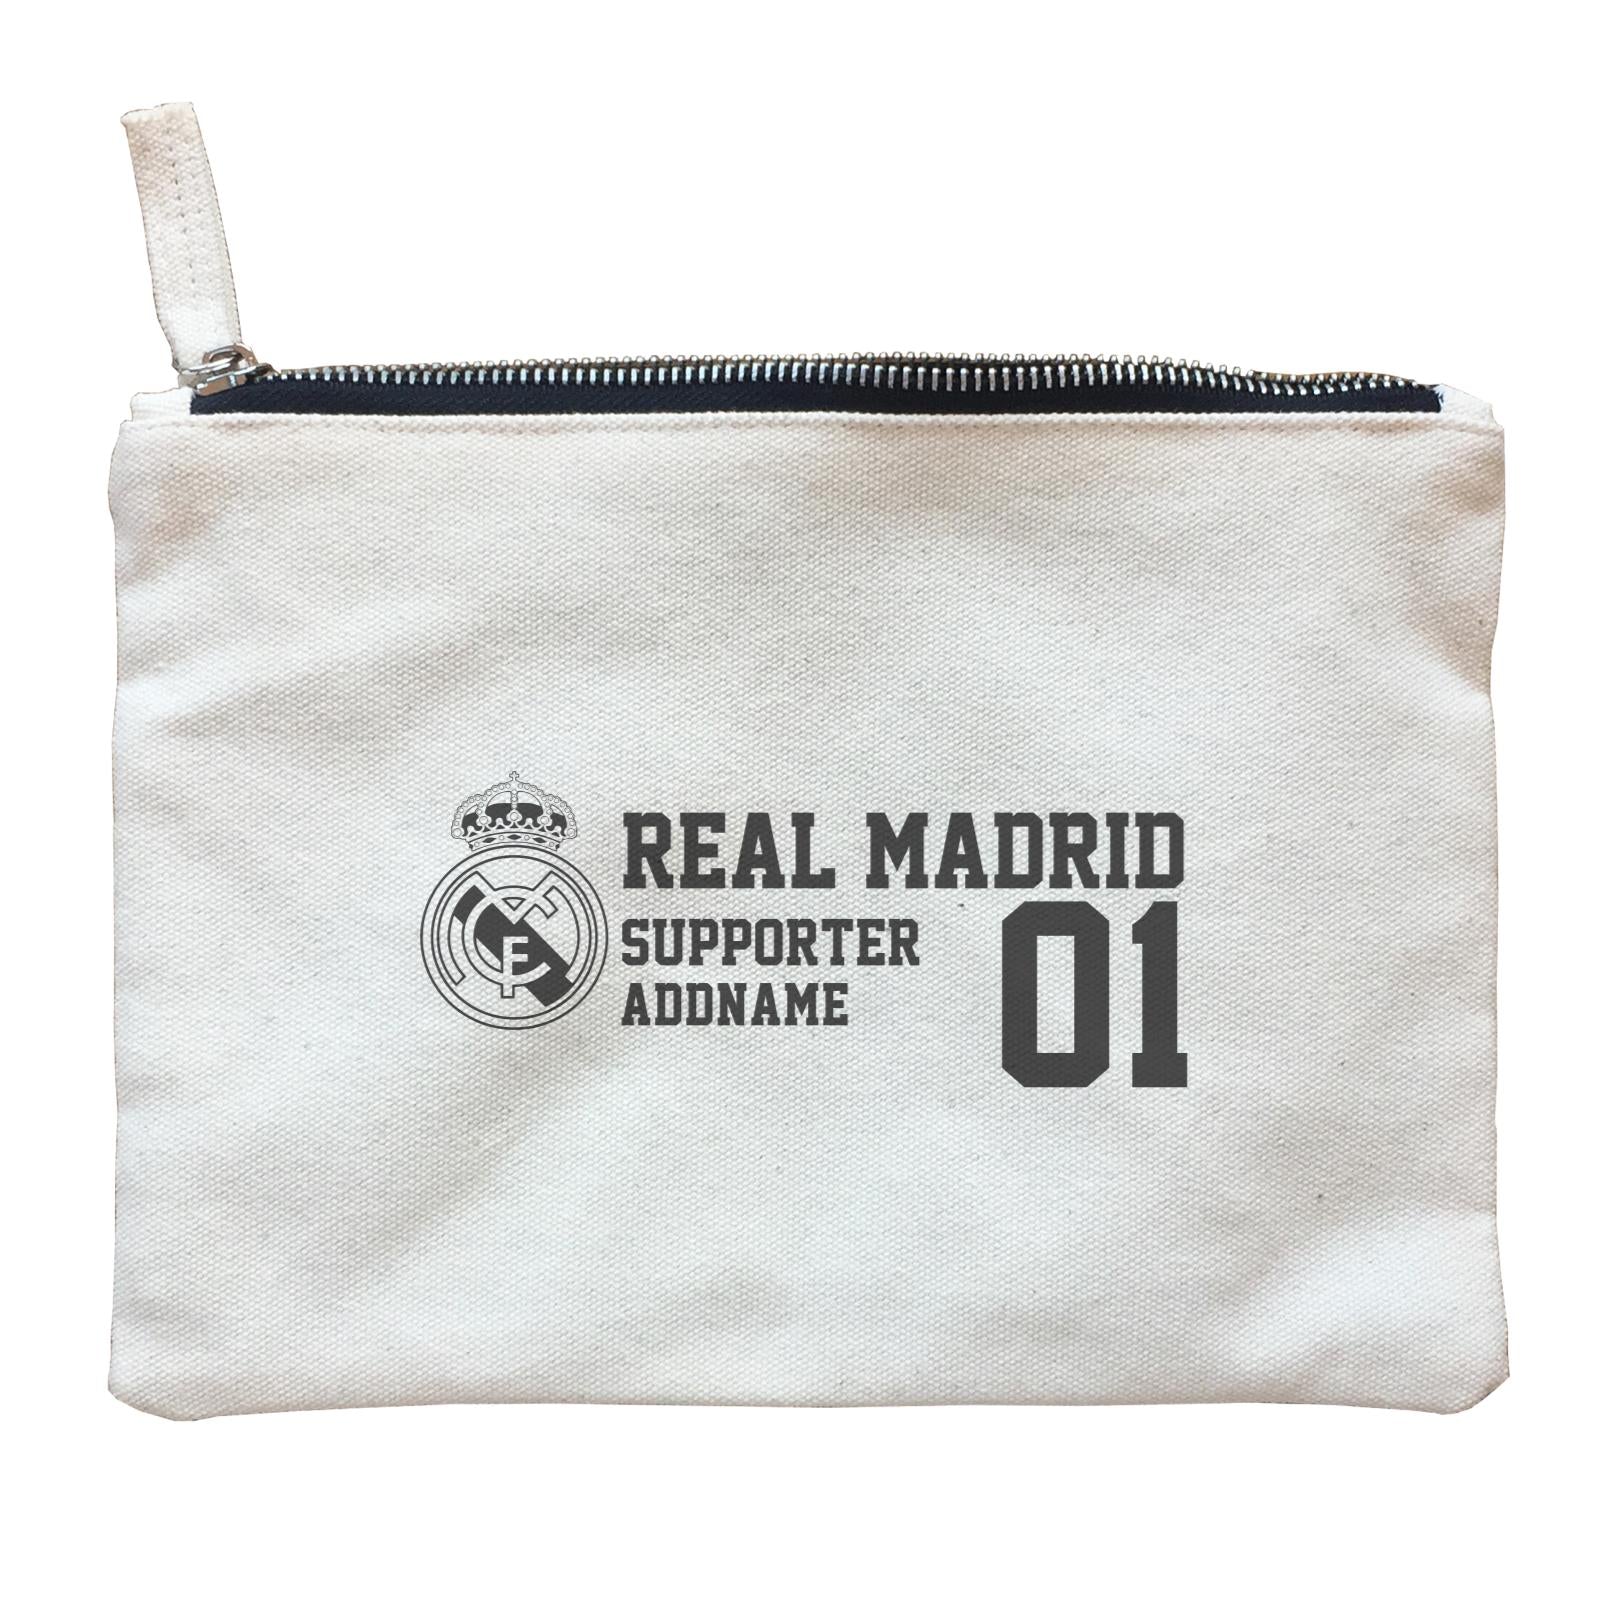 Real Madrid Football Supporter Accessories Addname Zipper Pouch